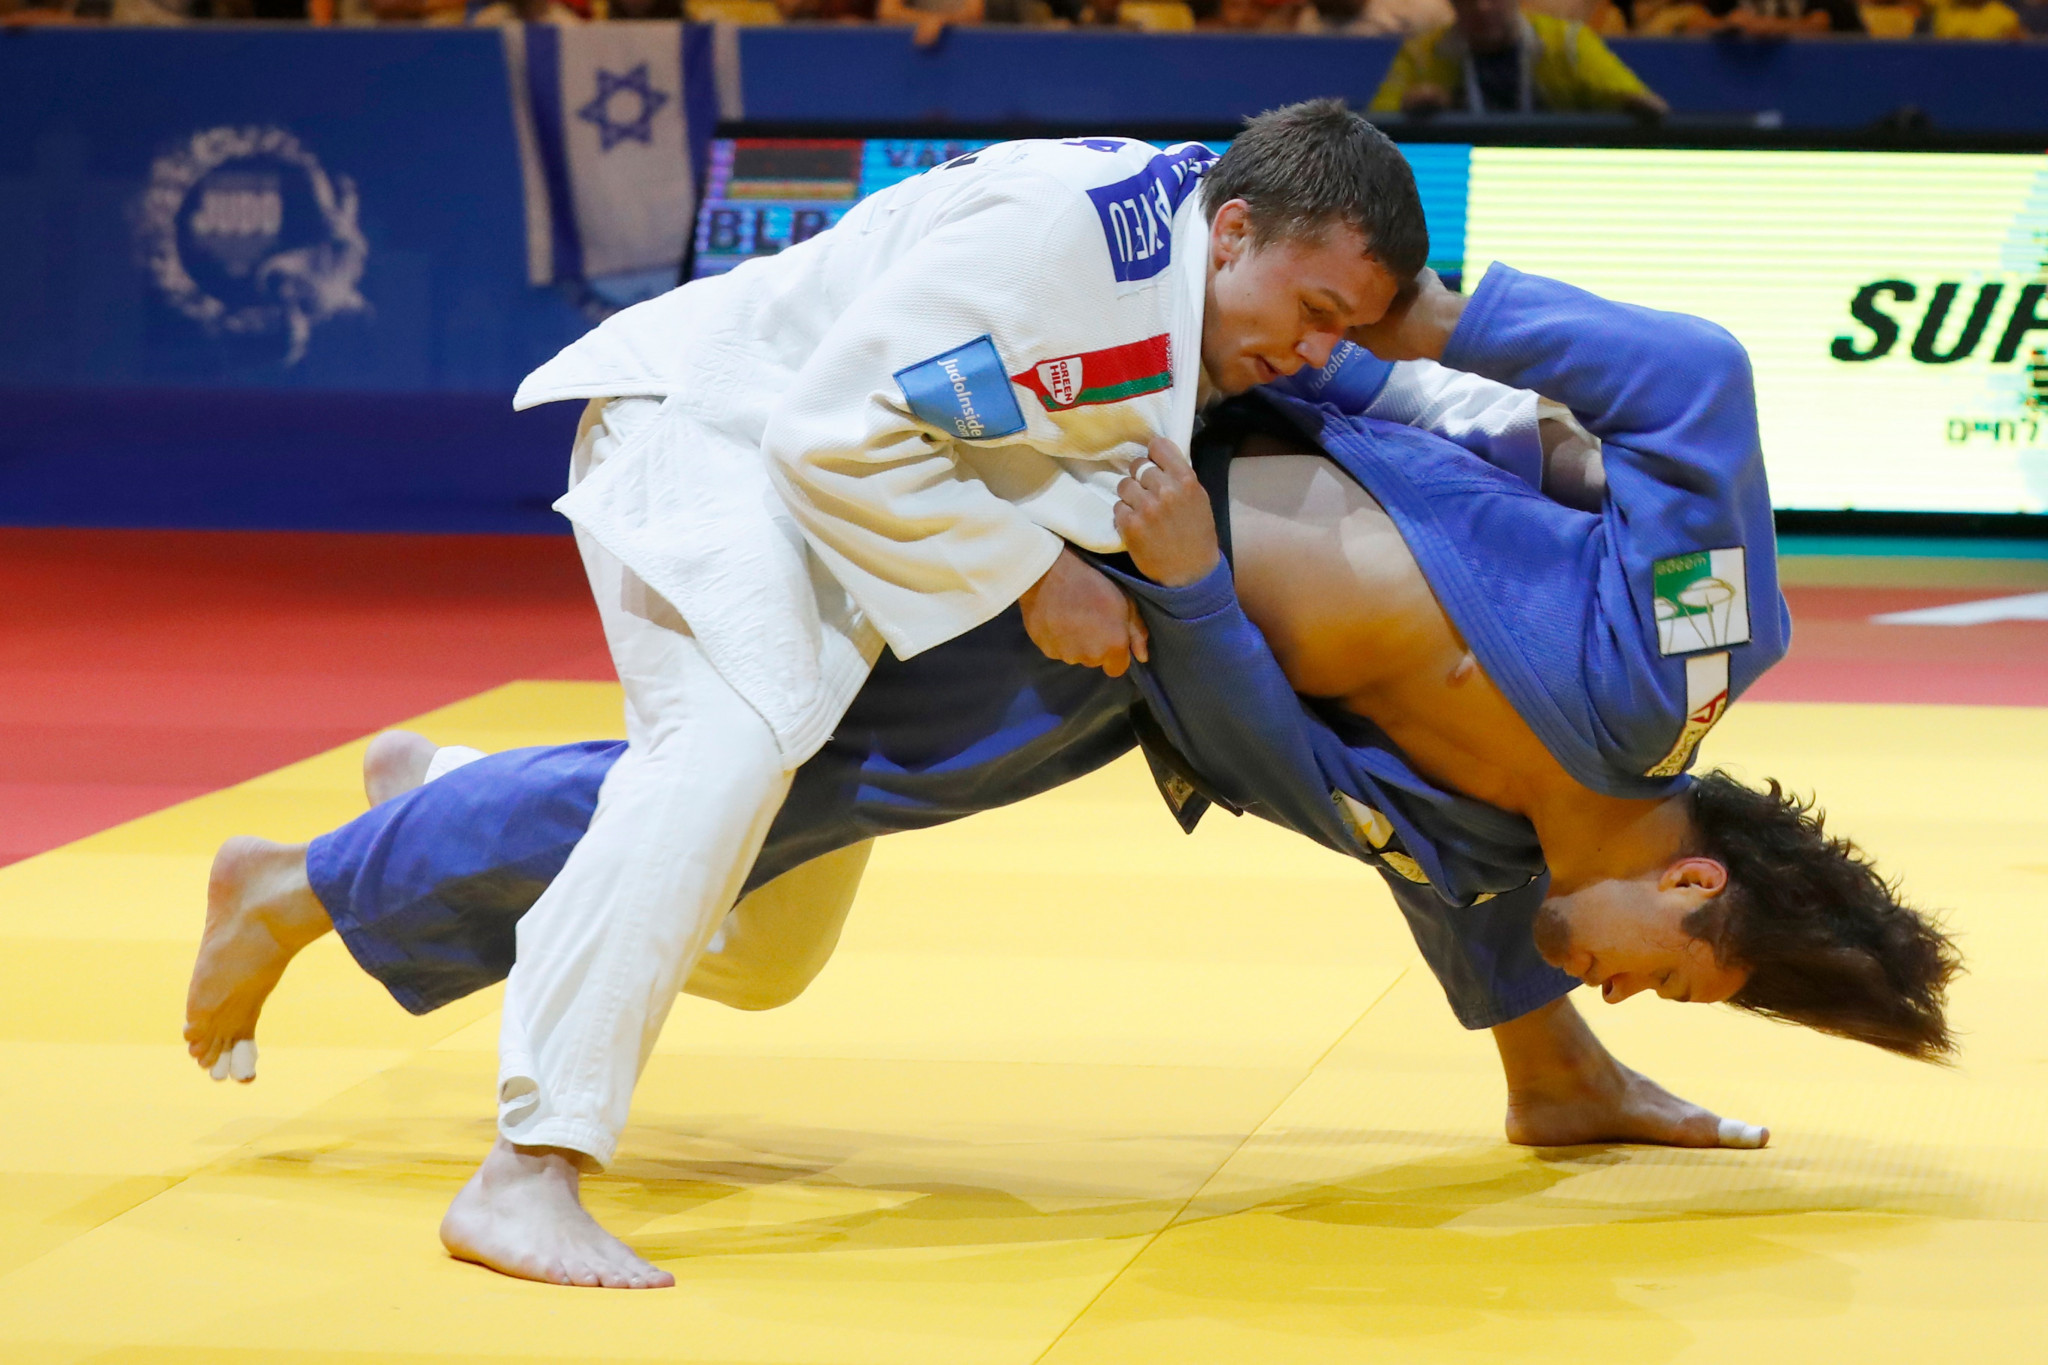 Two Belarusians set for World Judo Championships after admission as neutrals